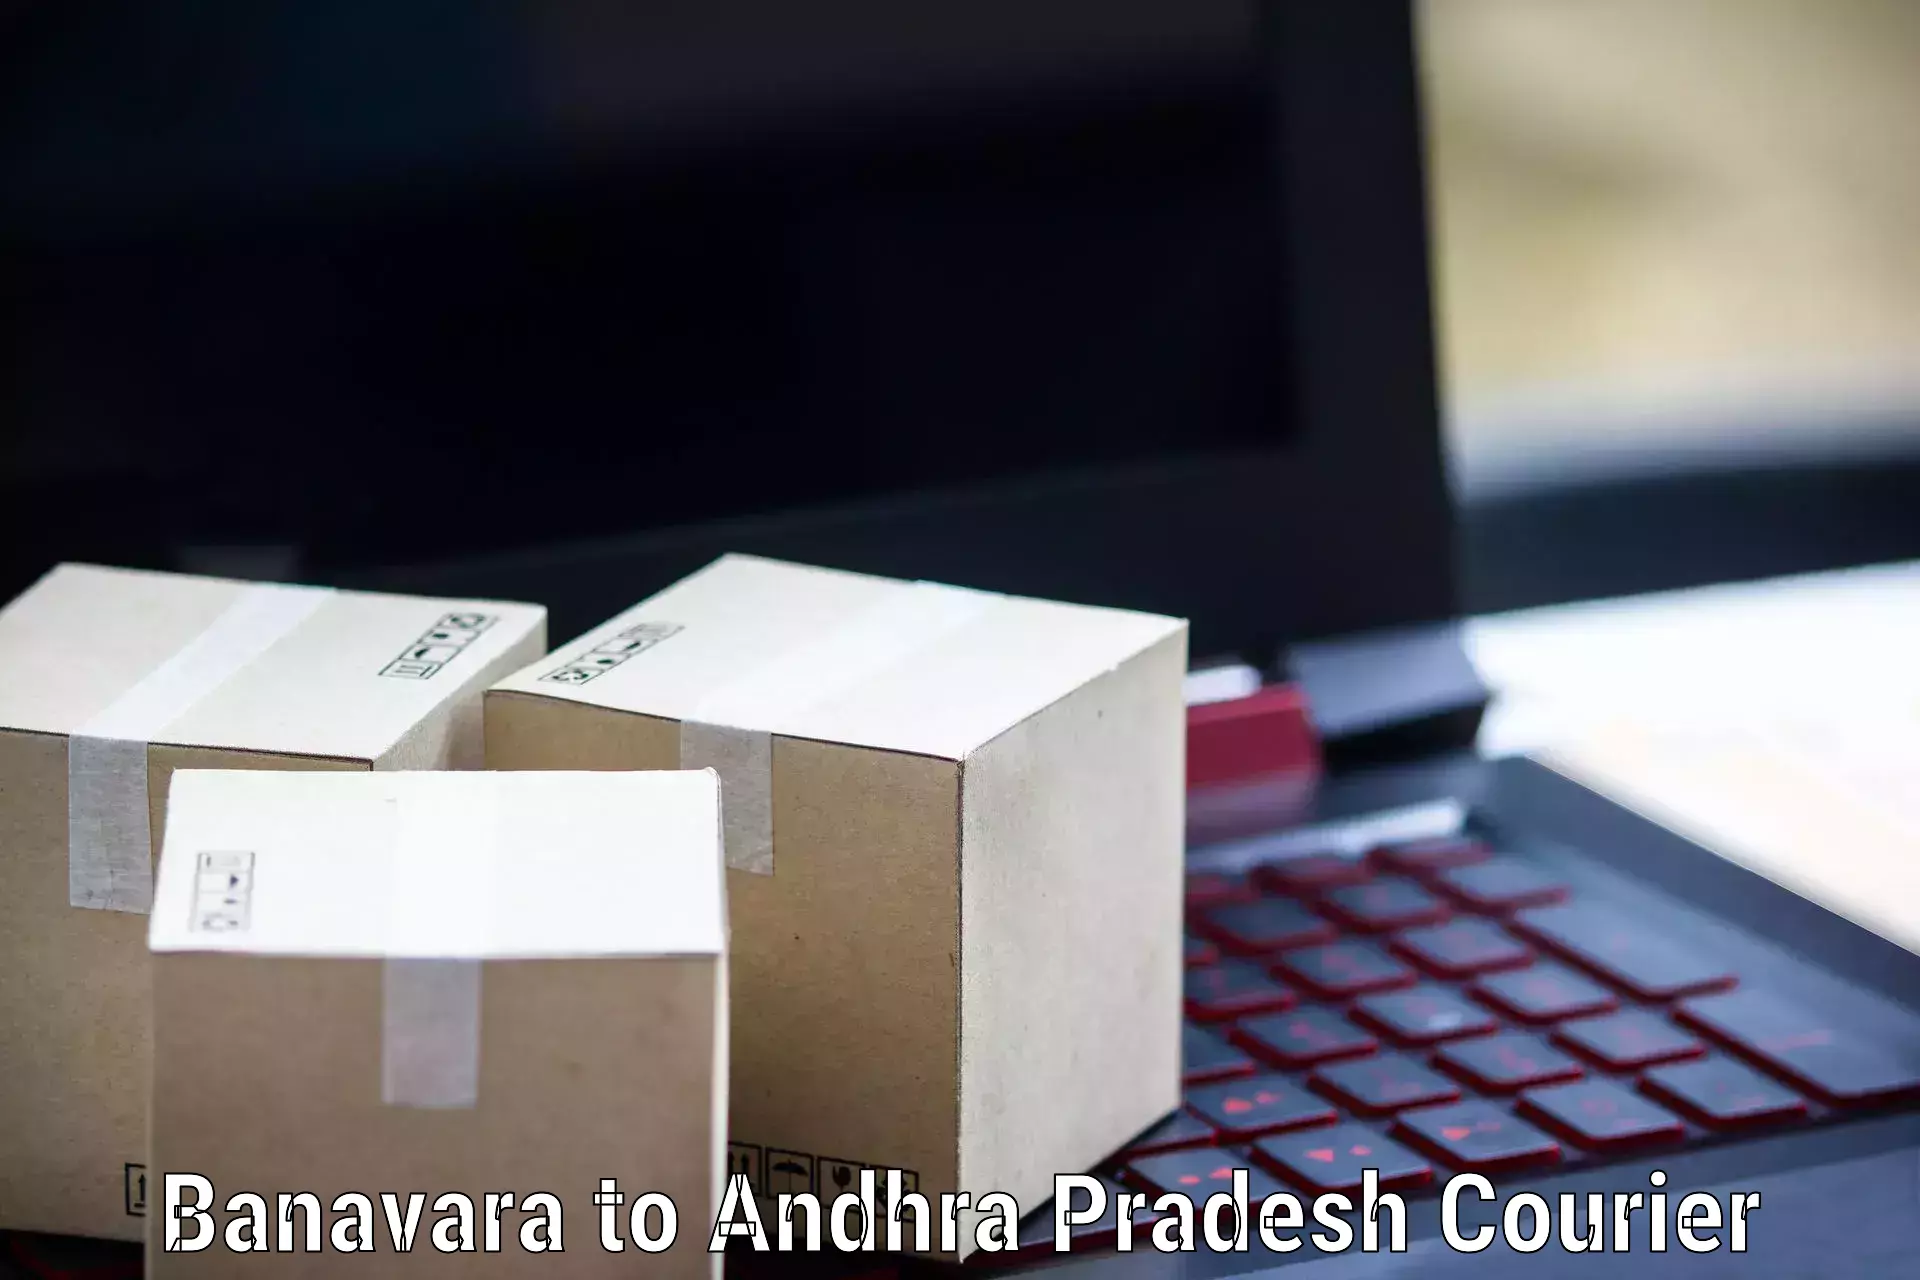 Modern courier technology Banavara to Ongole